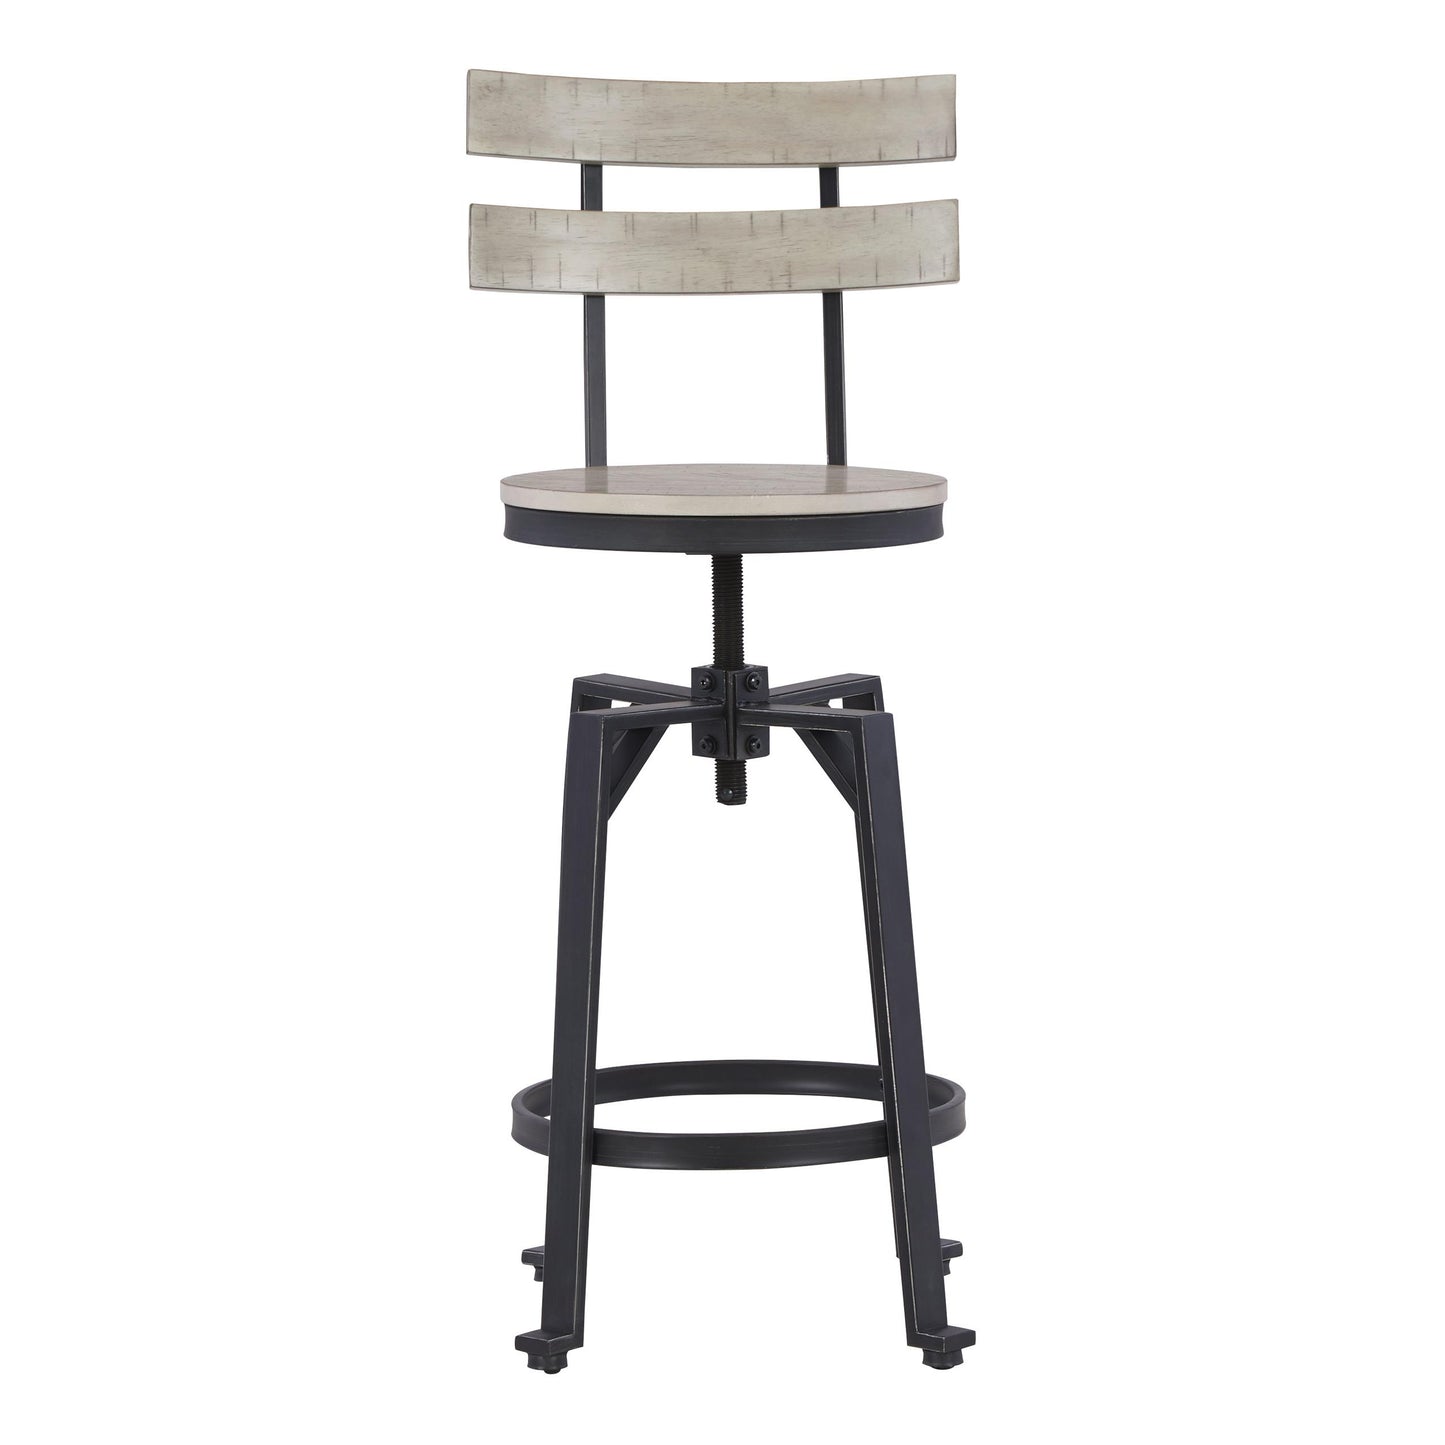 Signature Design by Ashley Karisslyn Adjustable Height Stool D336-124 IMAGE 2